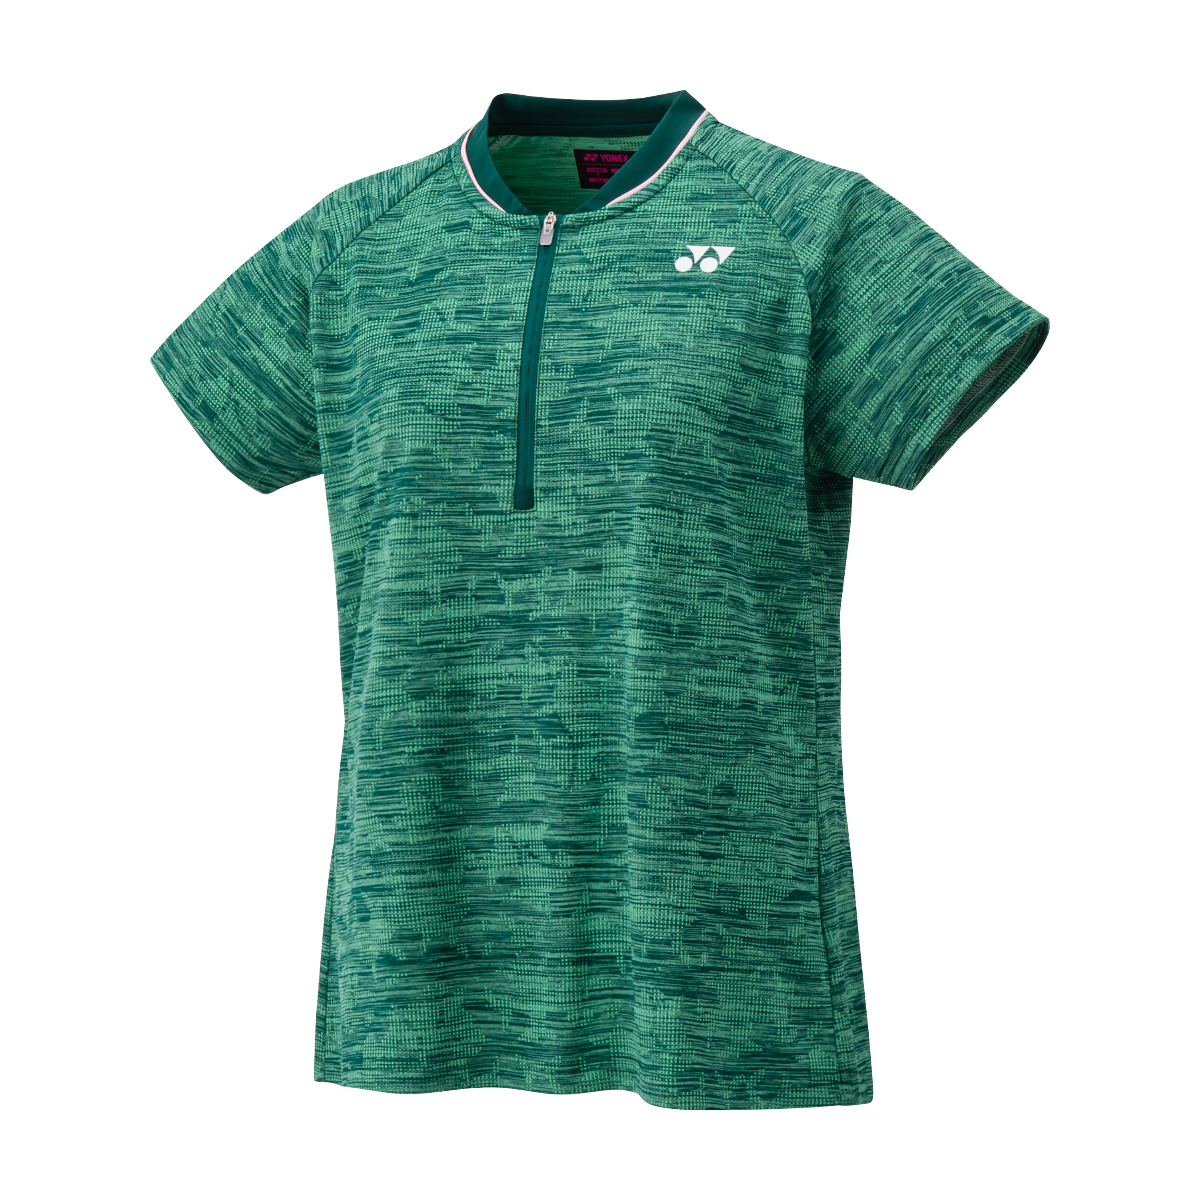 LADIES POLO 20652 FRENCH OPEN Teal Green